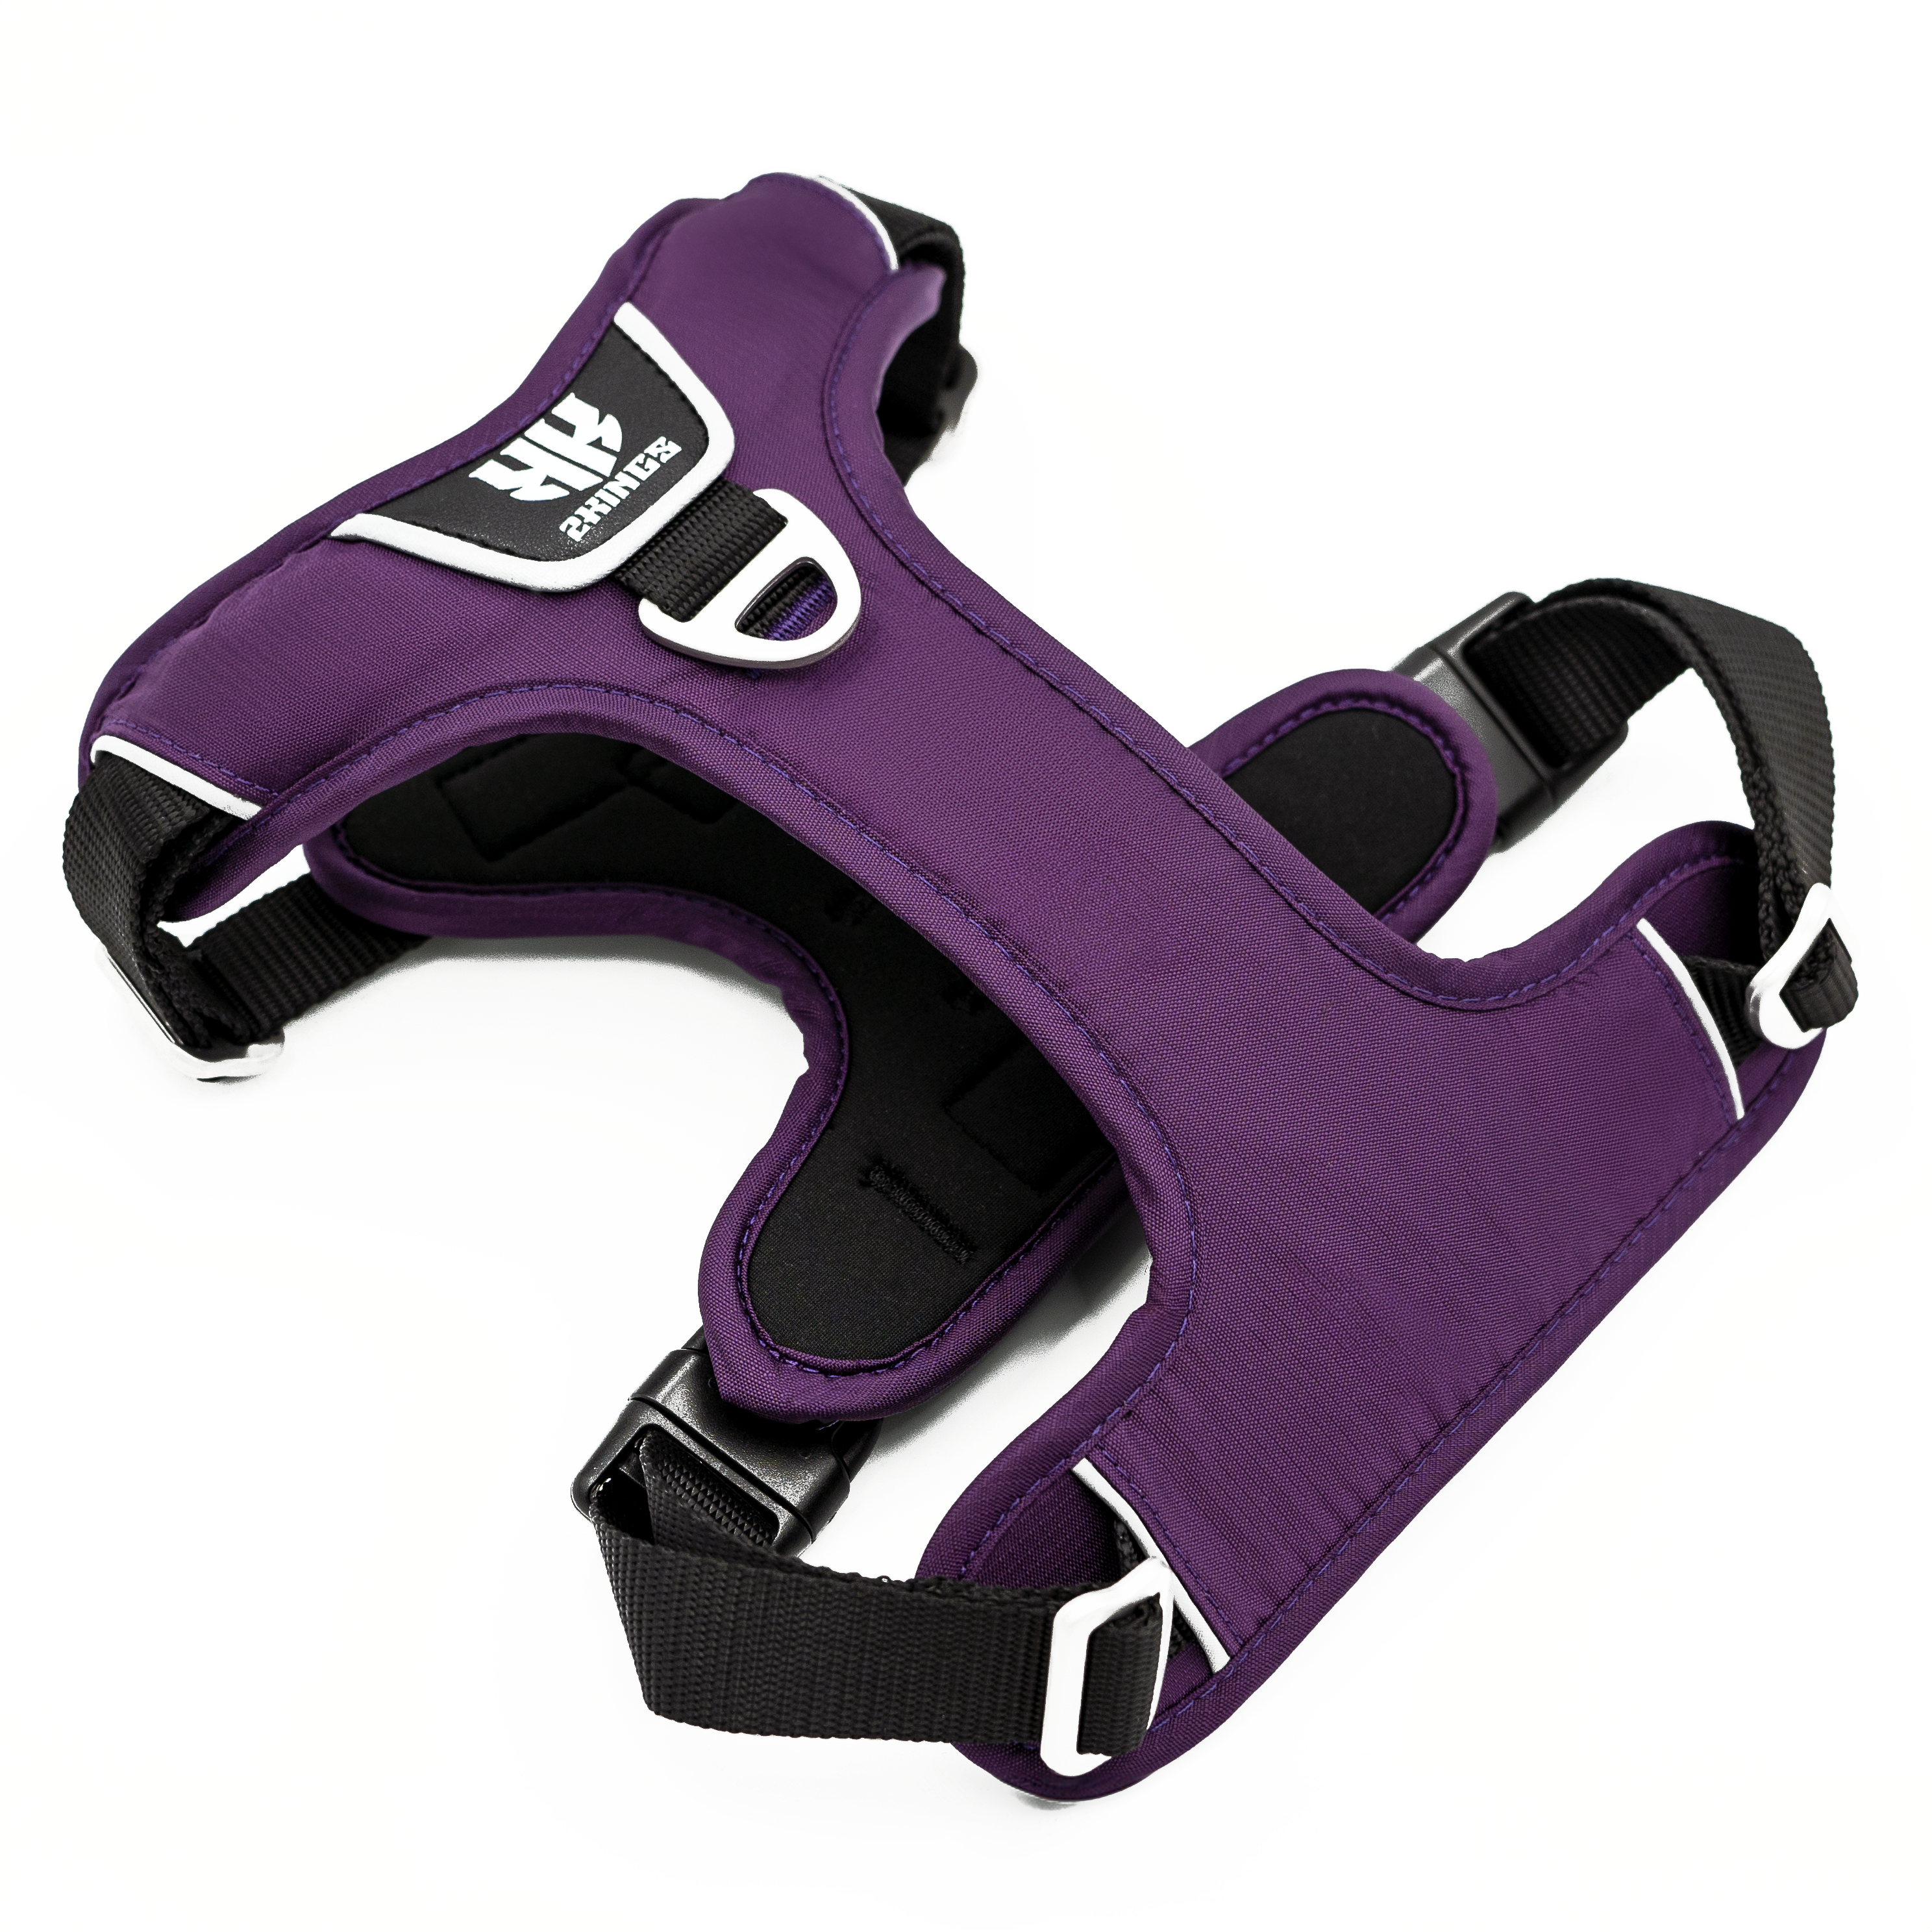 Comfort Dog Harness & Double Grip Lead Set - Padded & Waterproof with Top Handle - Purple.